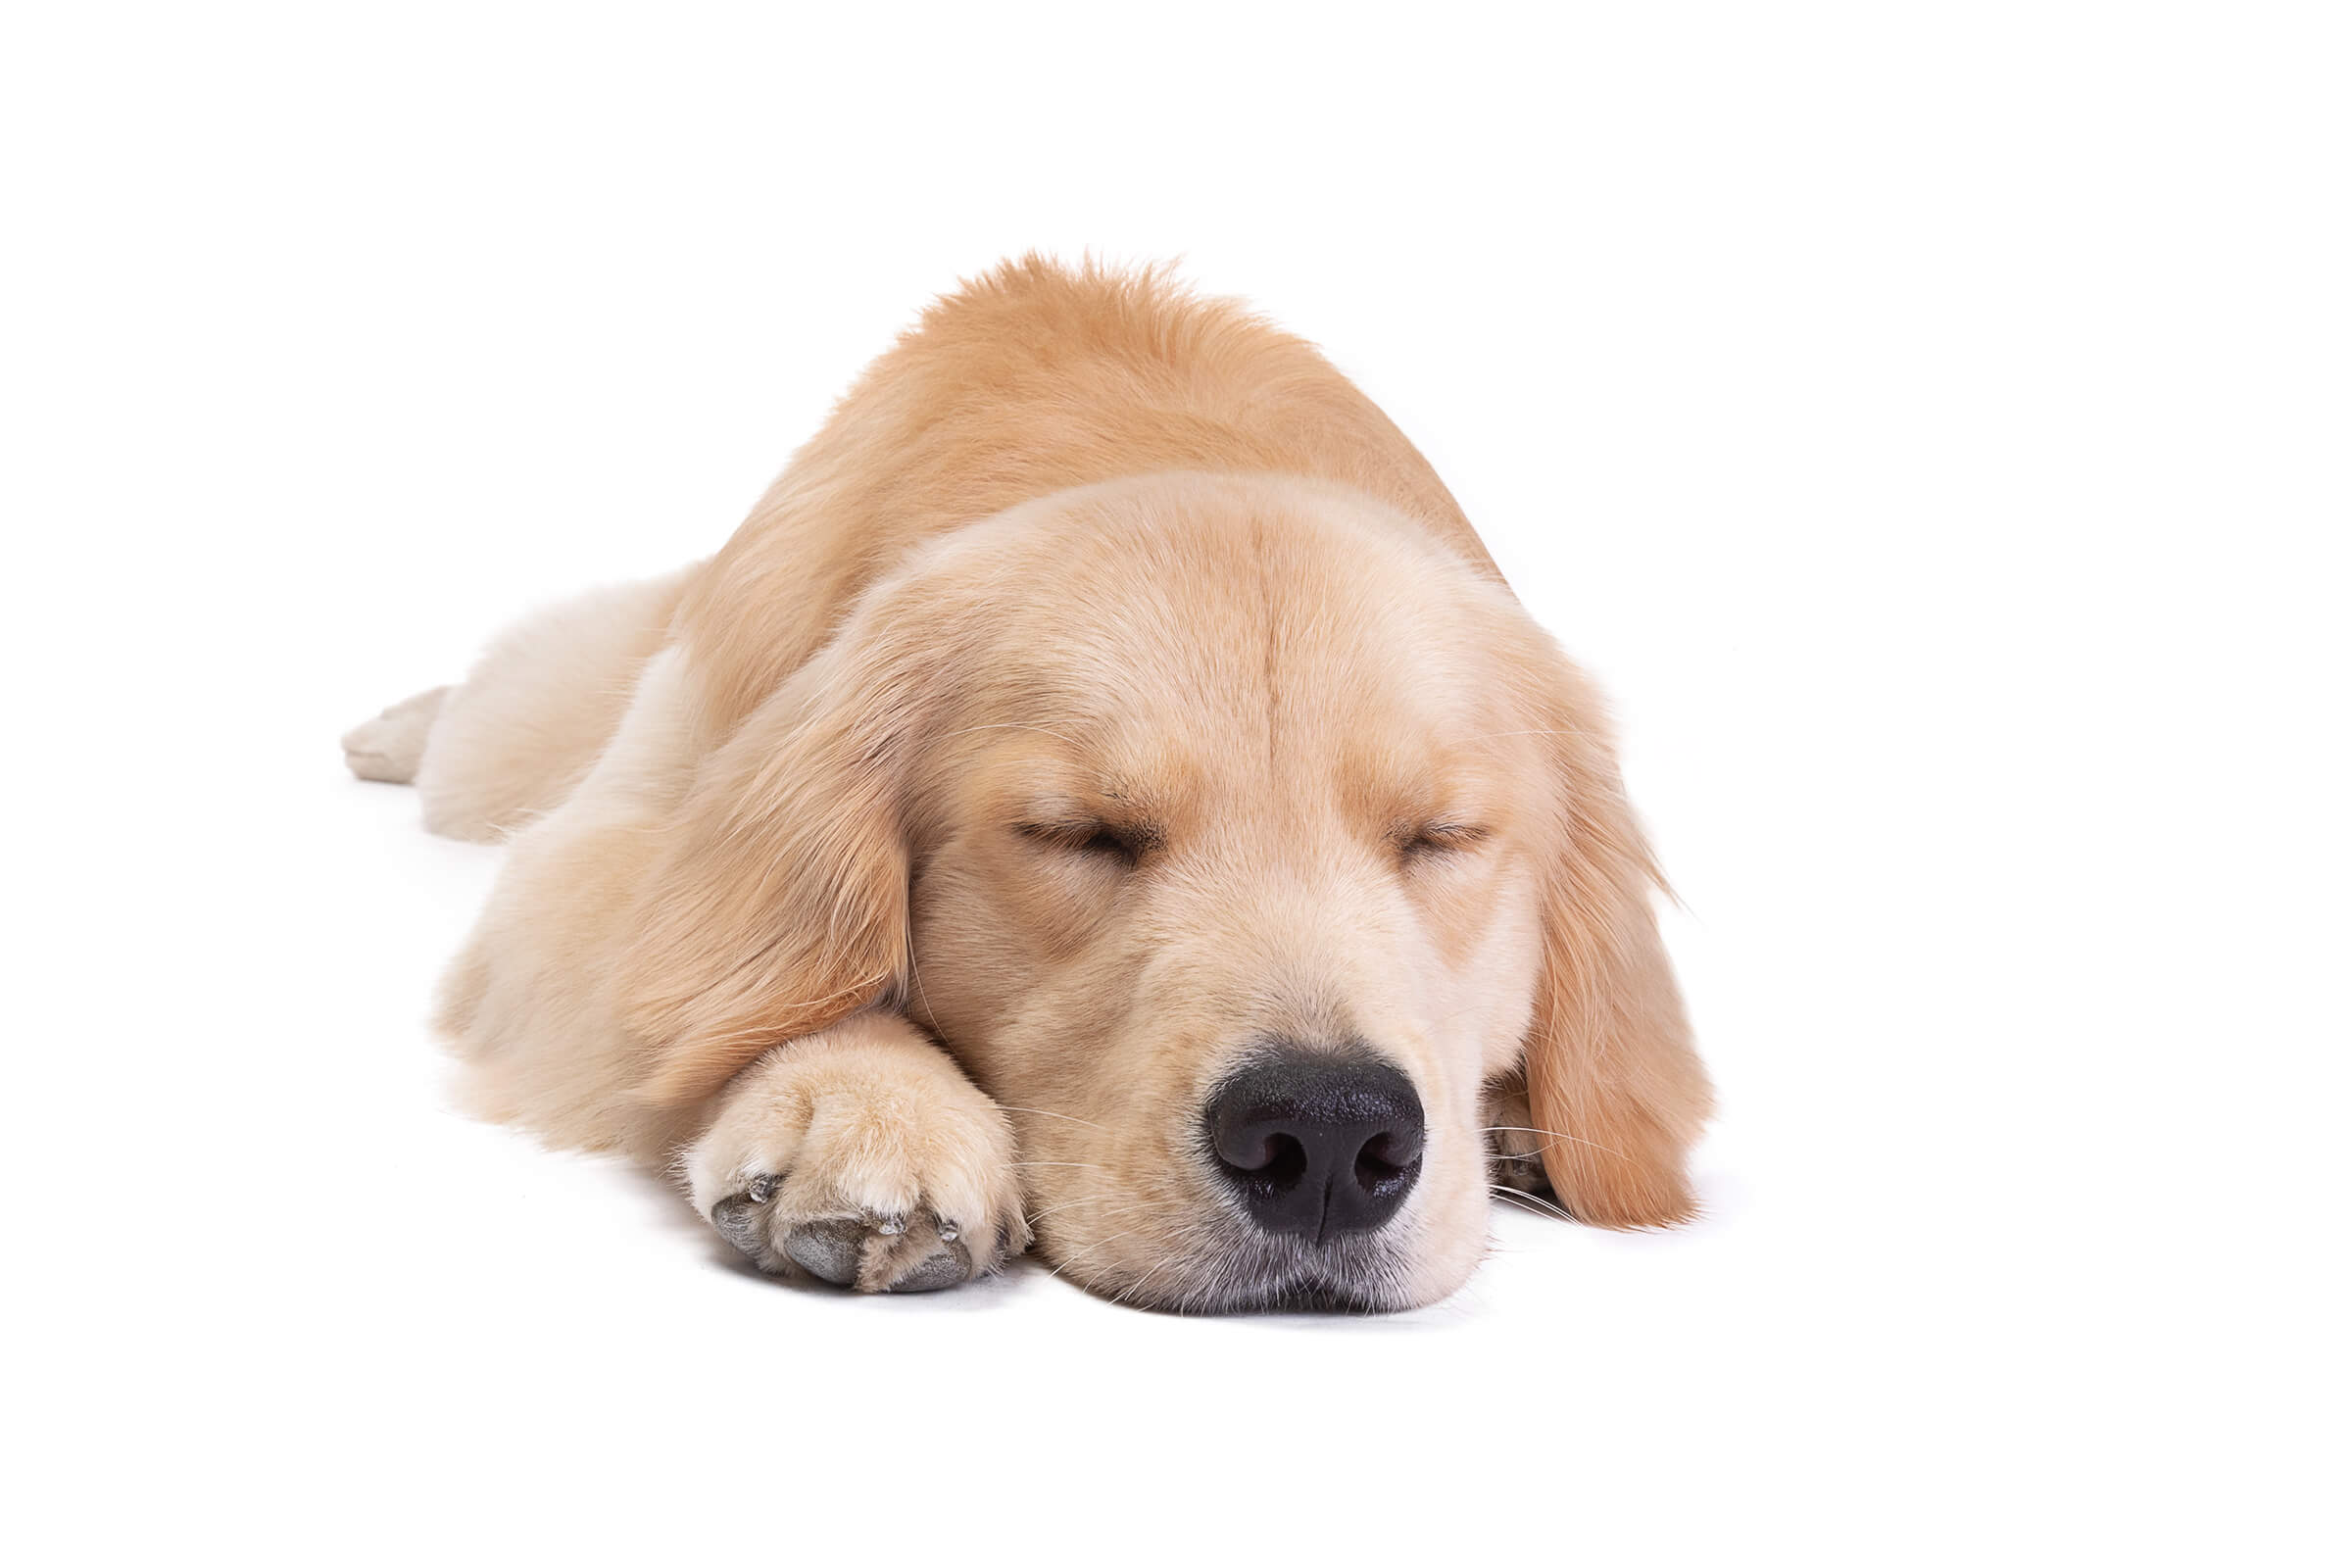 sleeping dog in commercial photography shoot